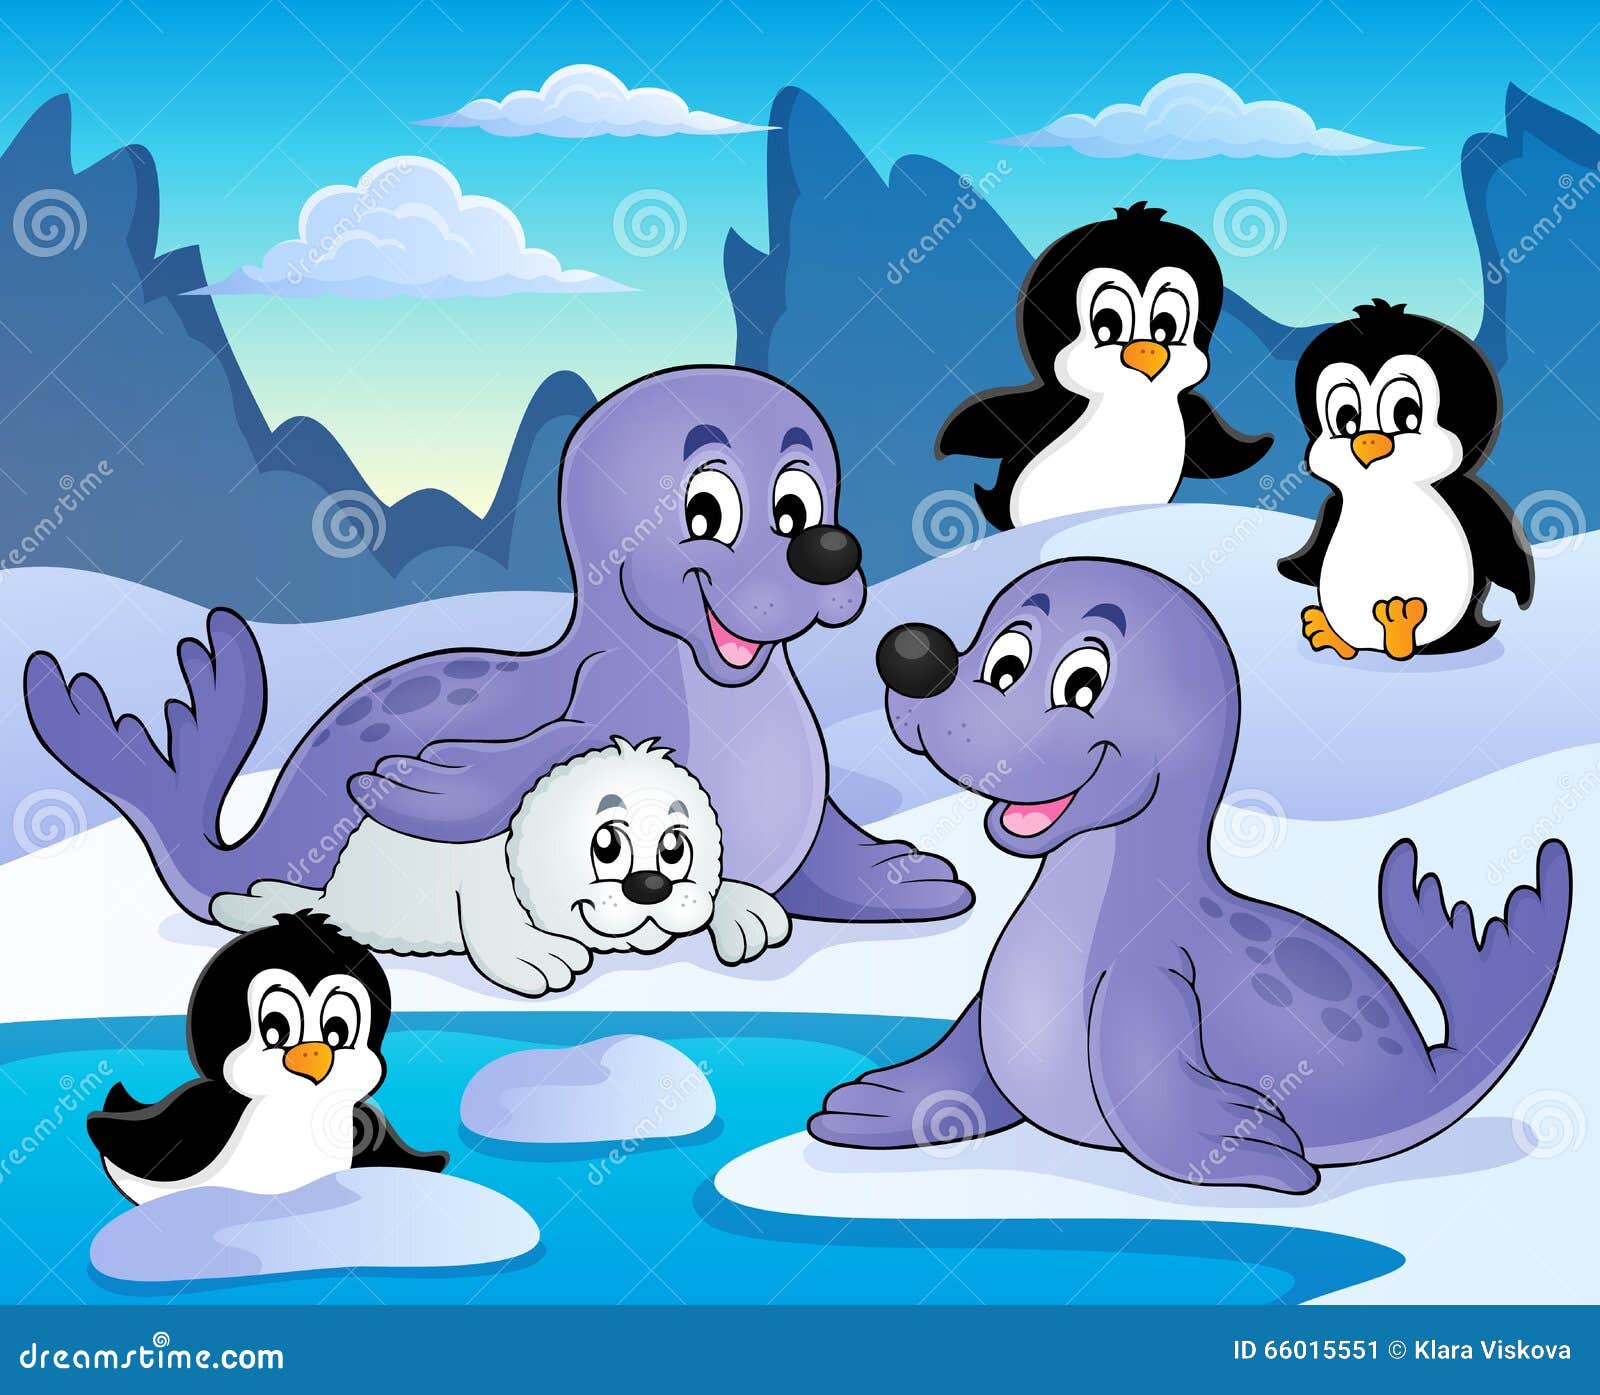 seals and penguins theme image 1